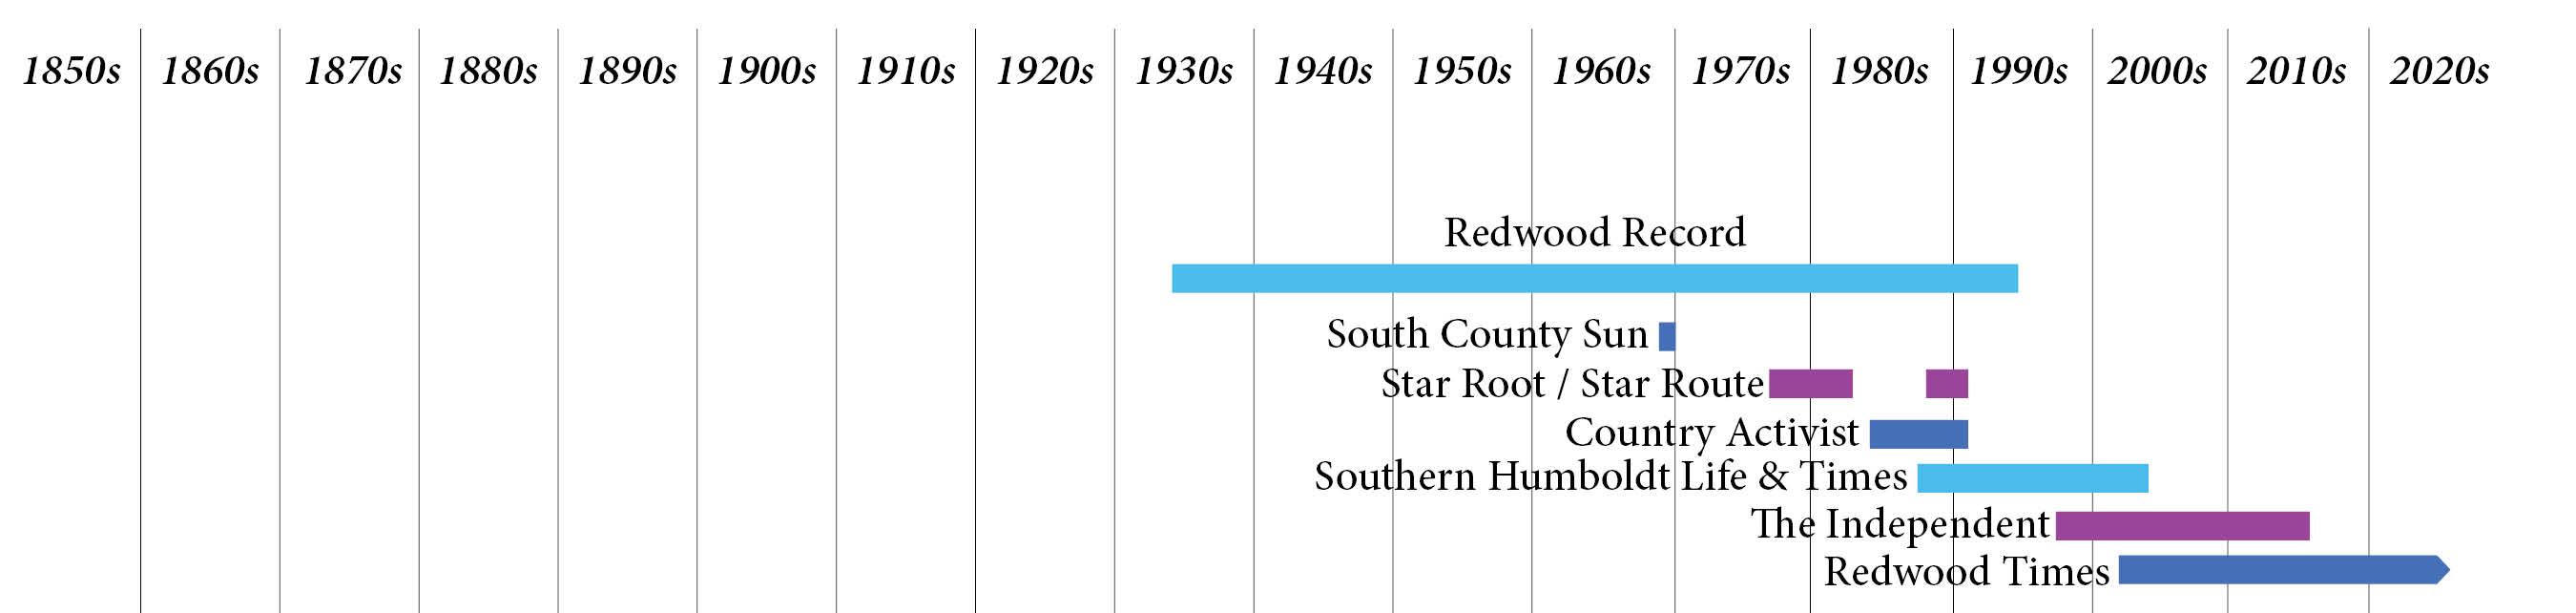 Timeline of Southern Humboldt County newspapers